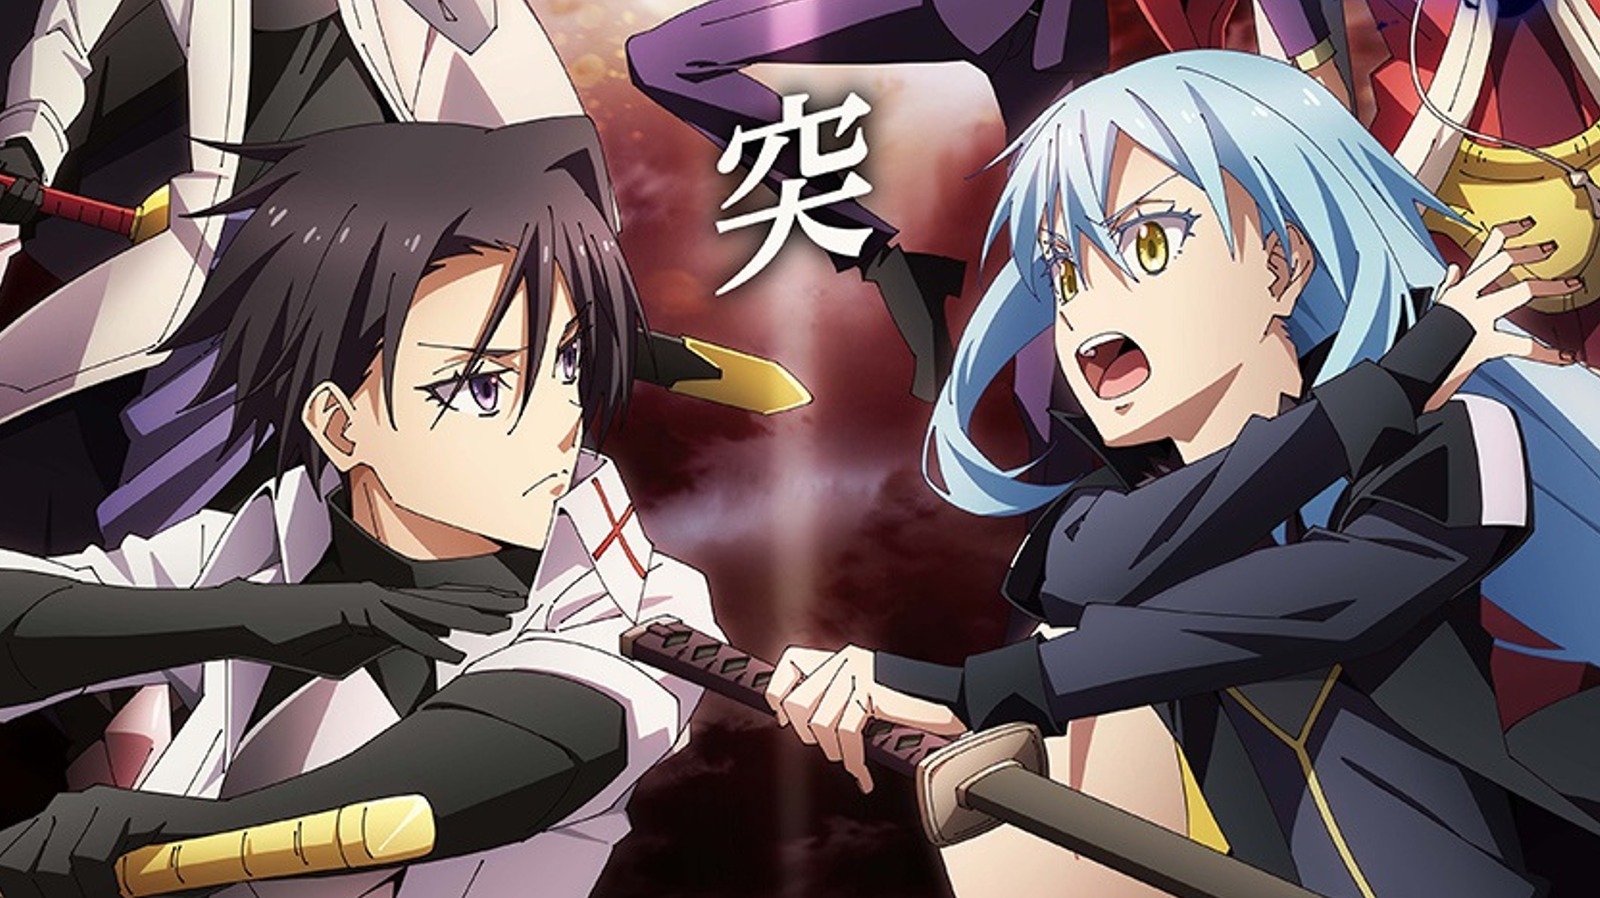 Amazon.com: That Time I Got Reincarnated as a Slime: Season One Part One  [DVD] : Movies & TV